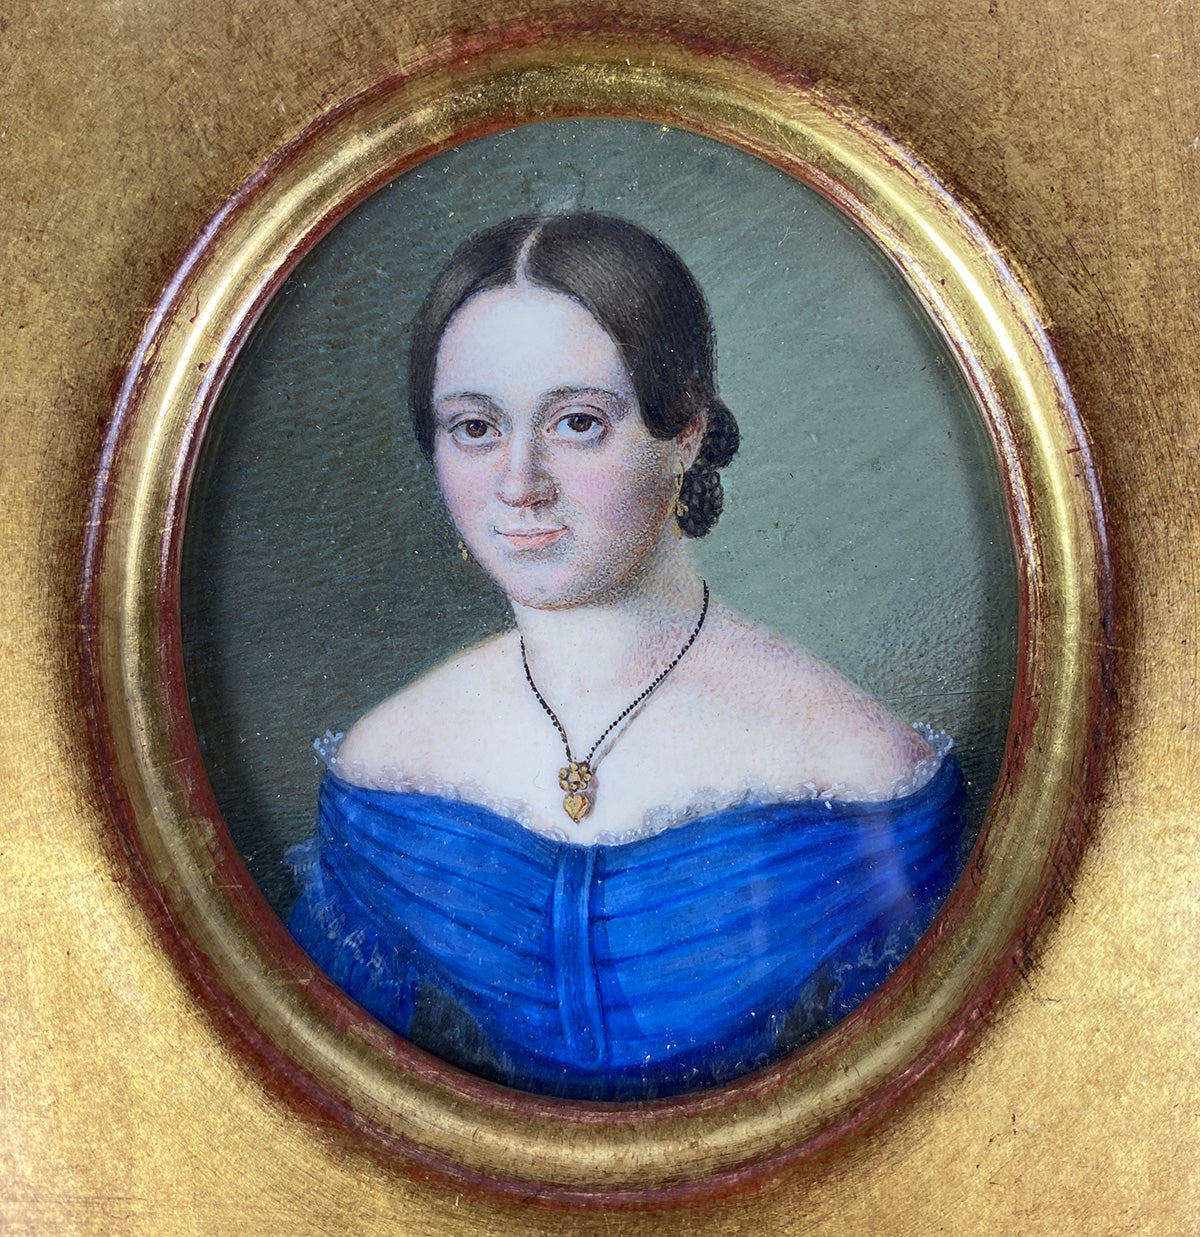 Antique French Portrait Miniature in Gild Wood Frame, Beautiful Young Woman with Jewelry